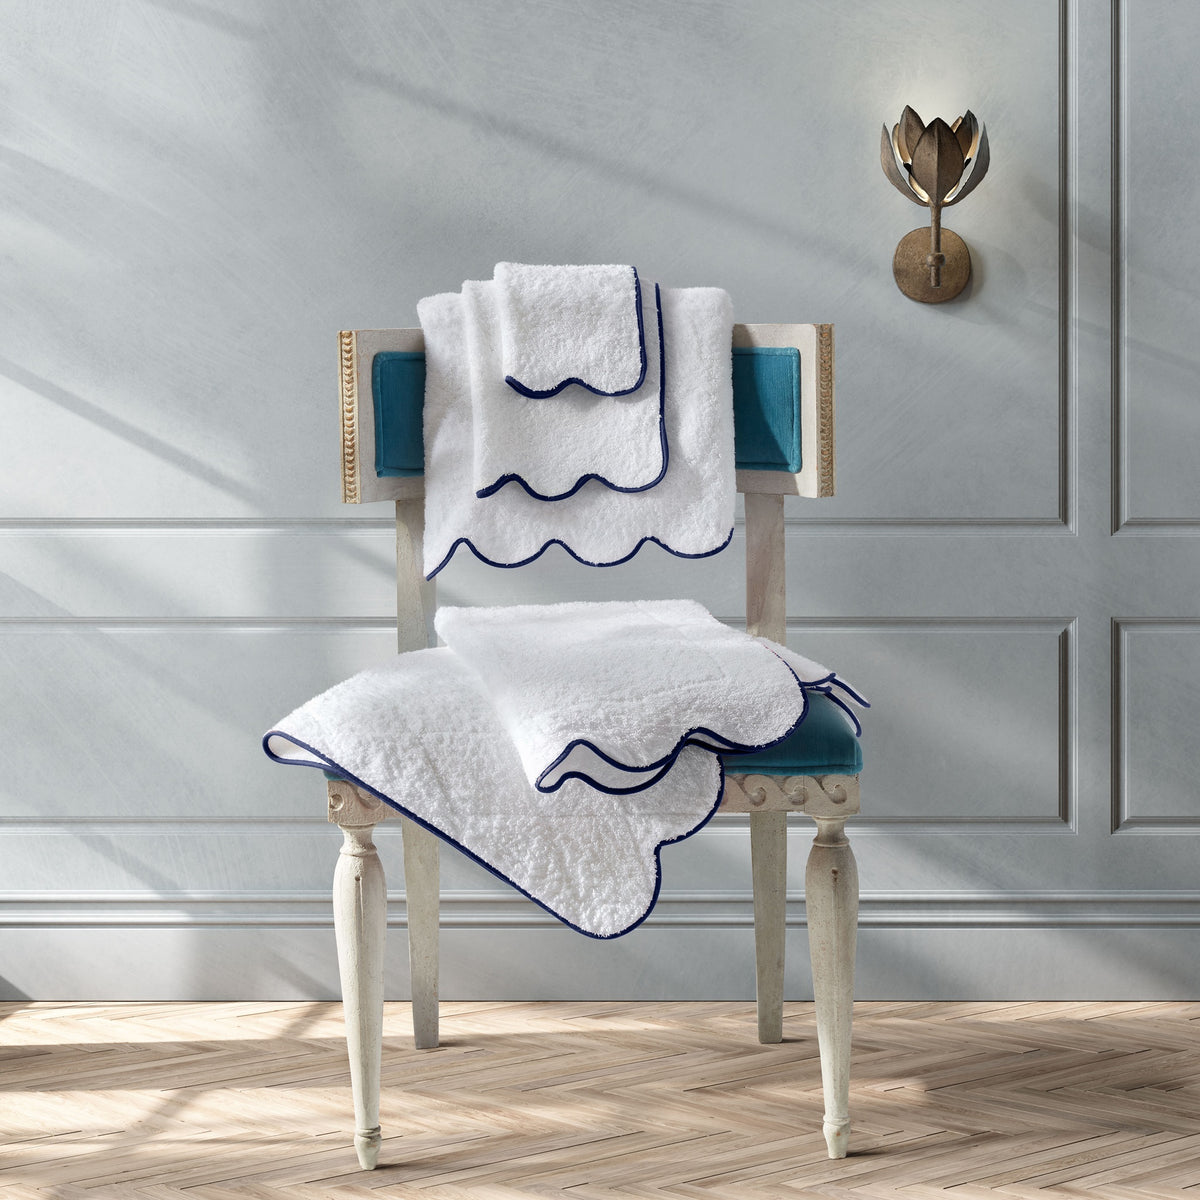 Matouk Cairo Scallop Bath Towels and Mats On A Chair